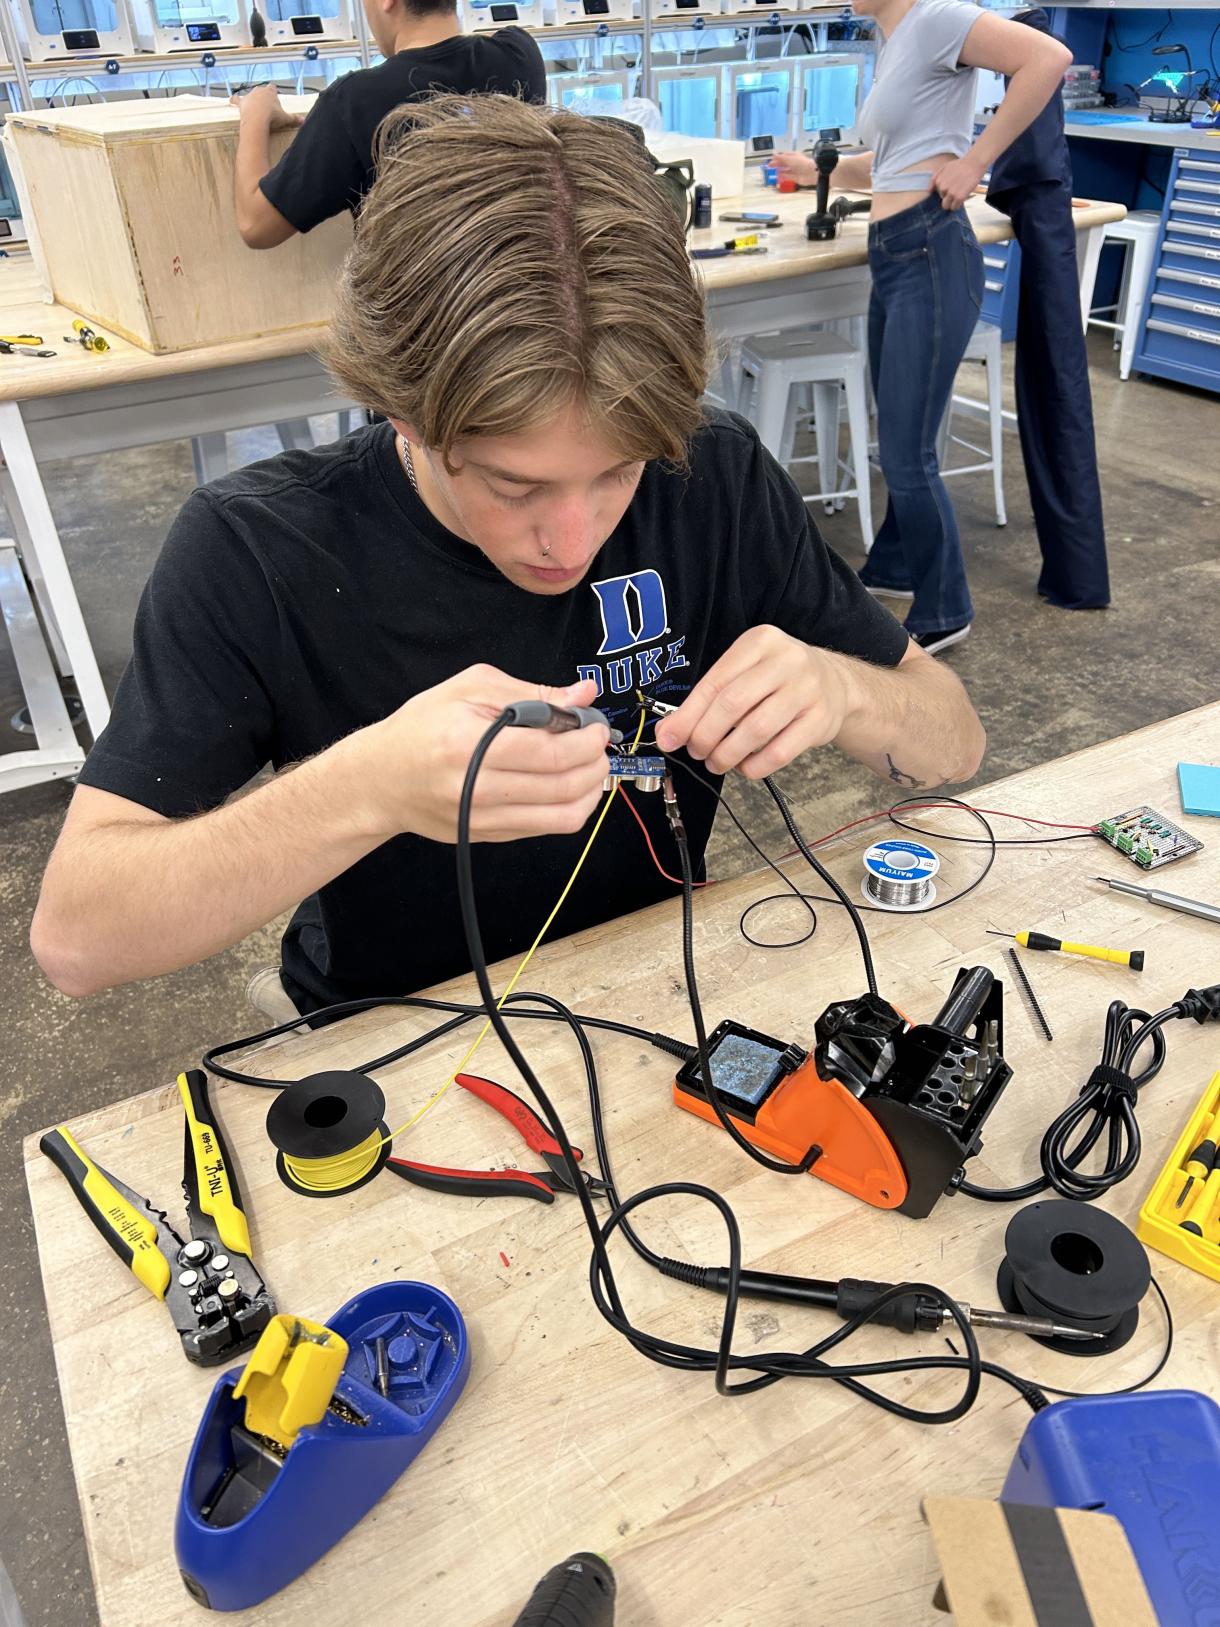 student soldering parts together for a project